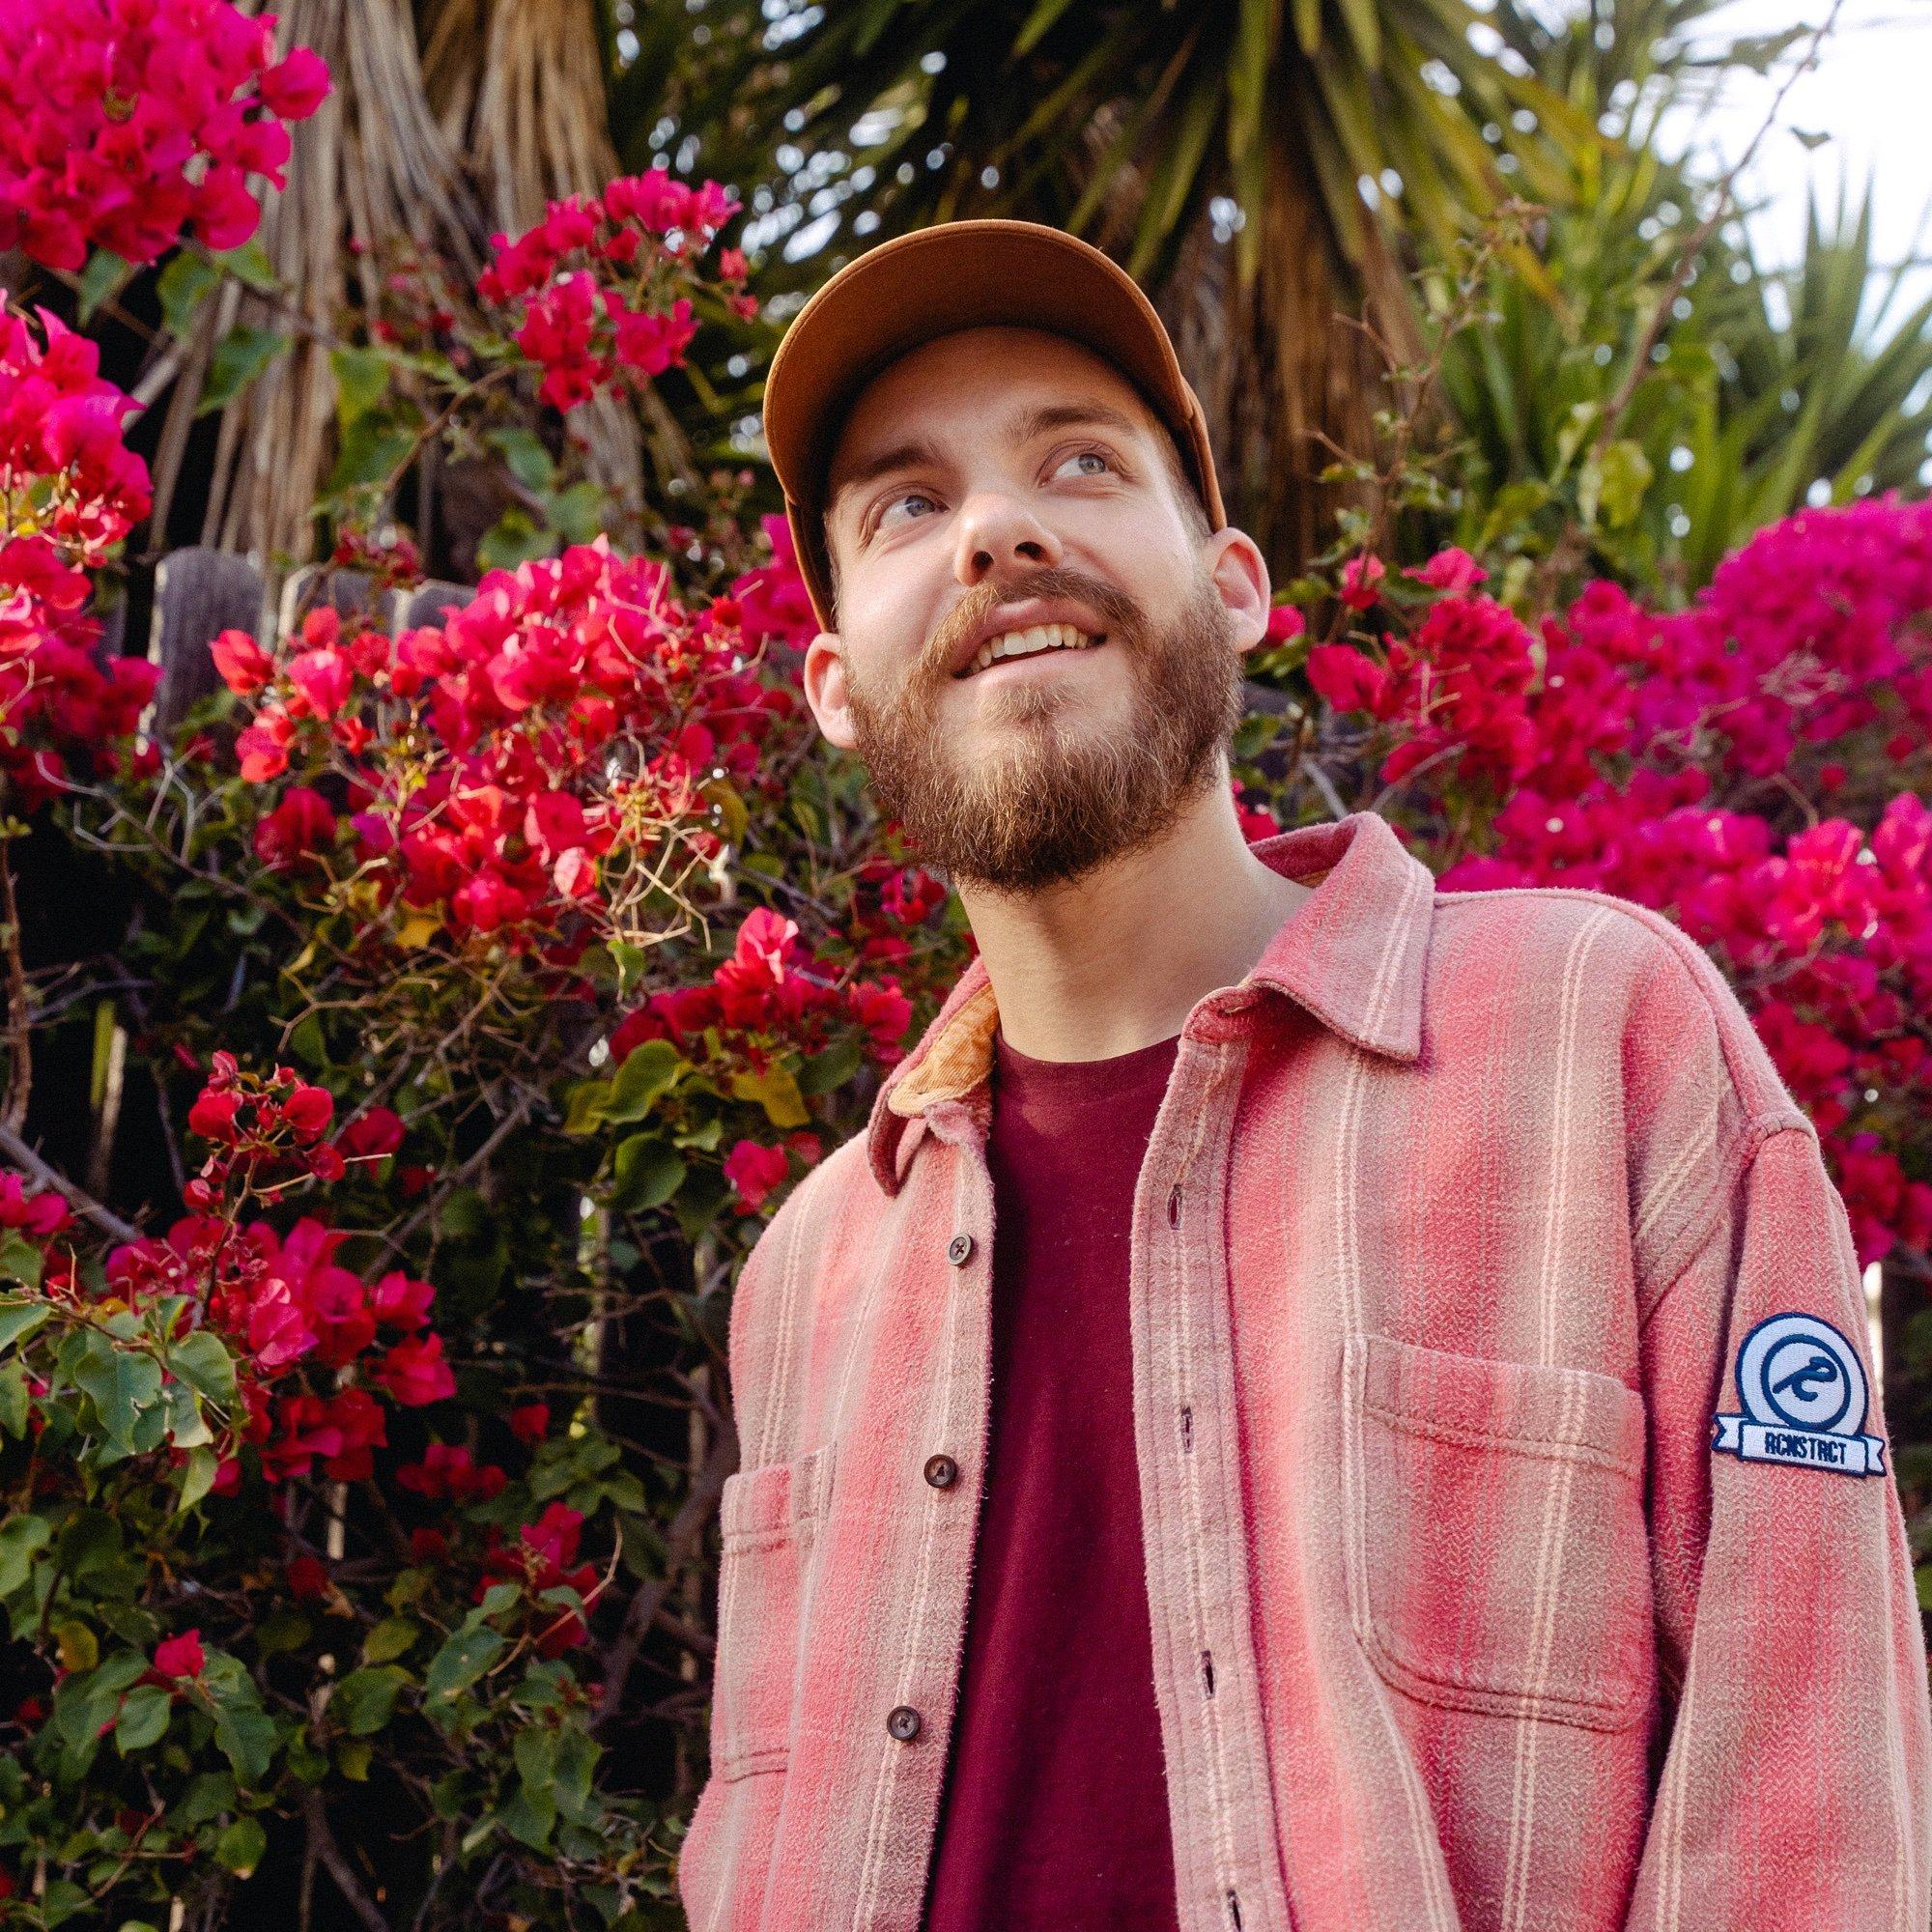 San Holo smiles in front of flowers